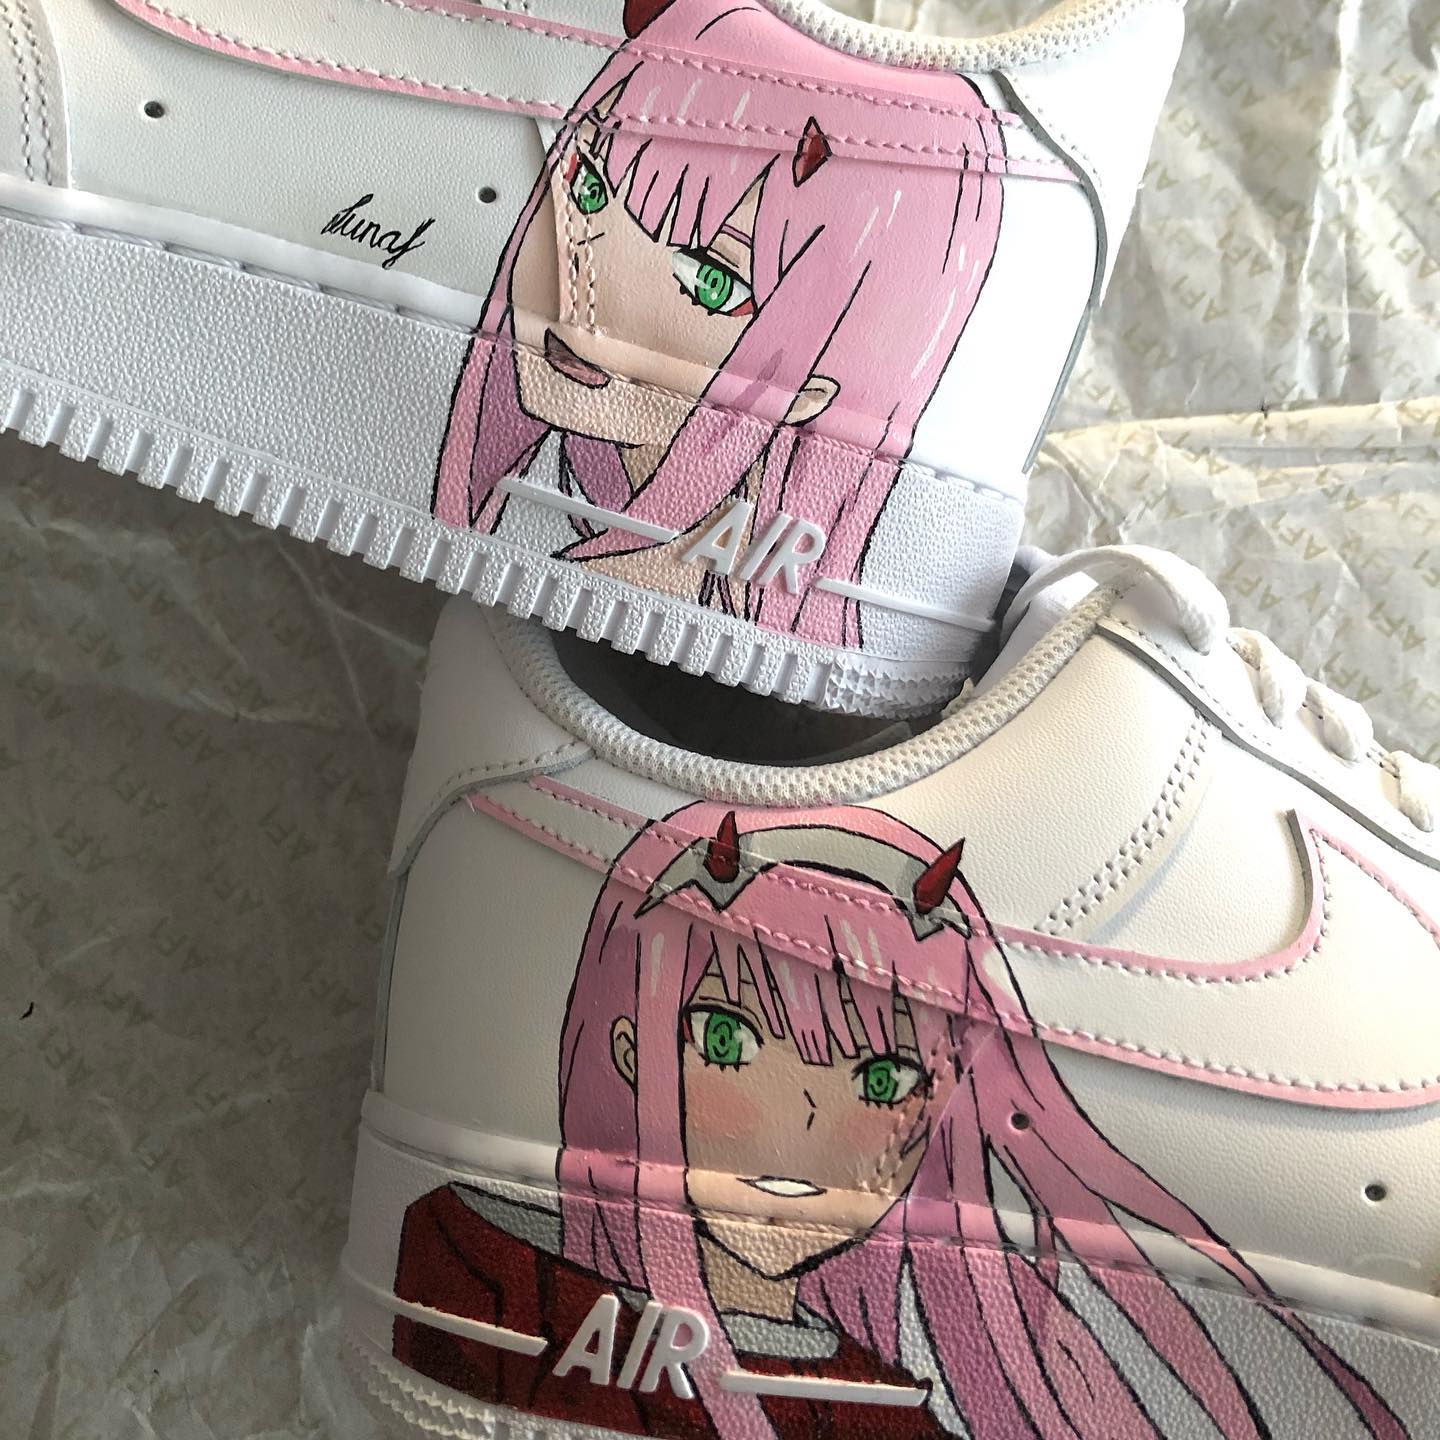 zero two air force 1